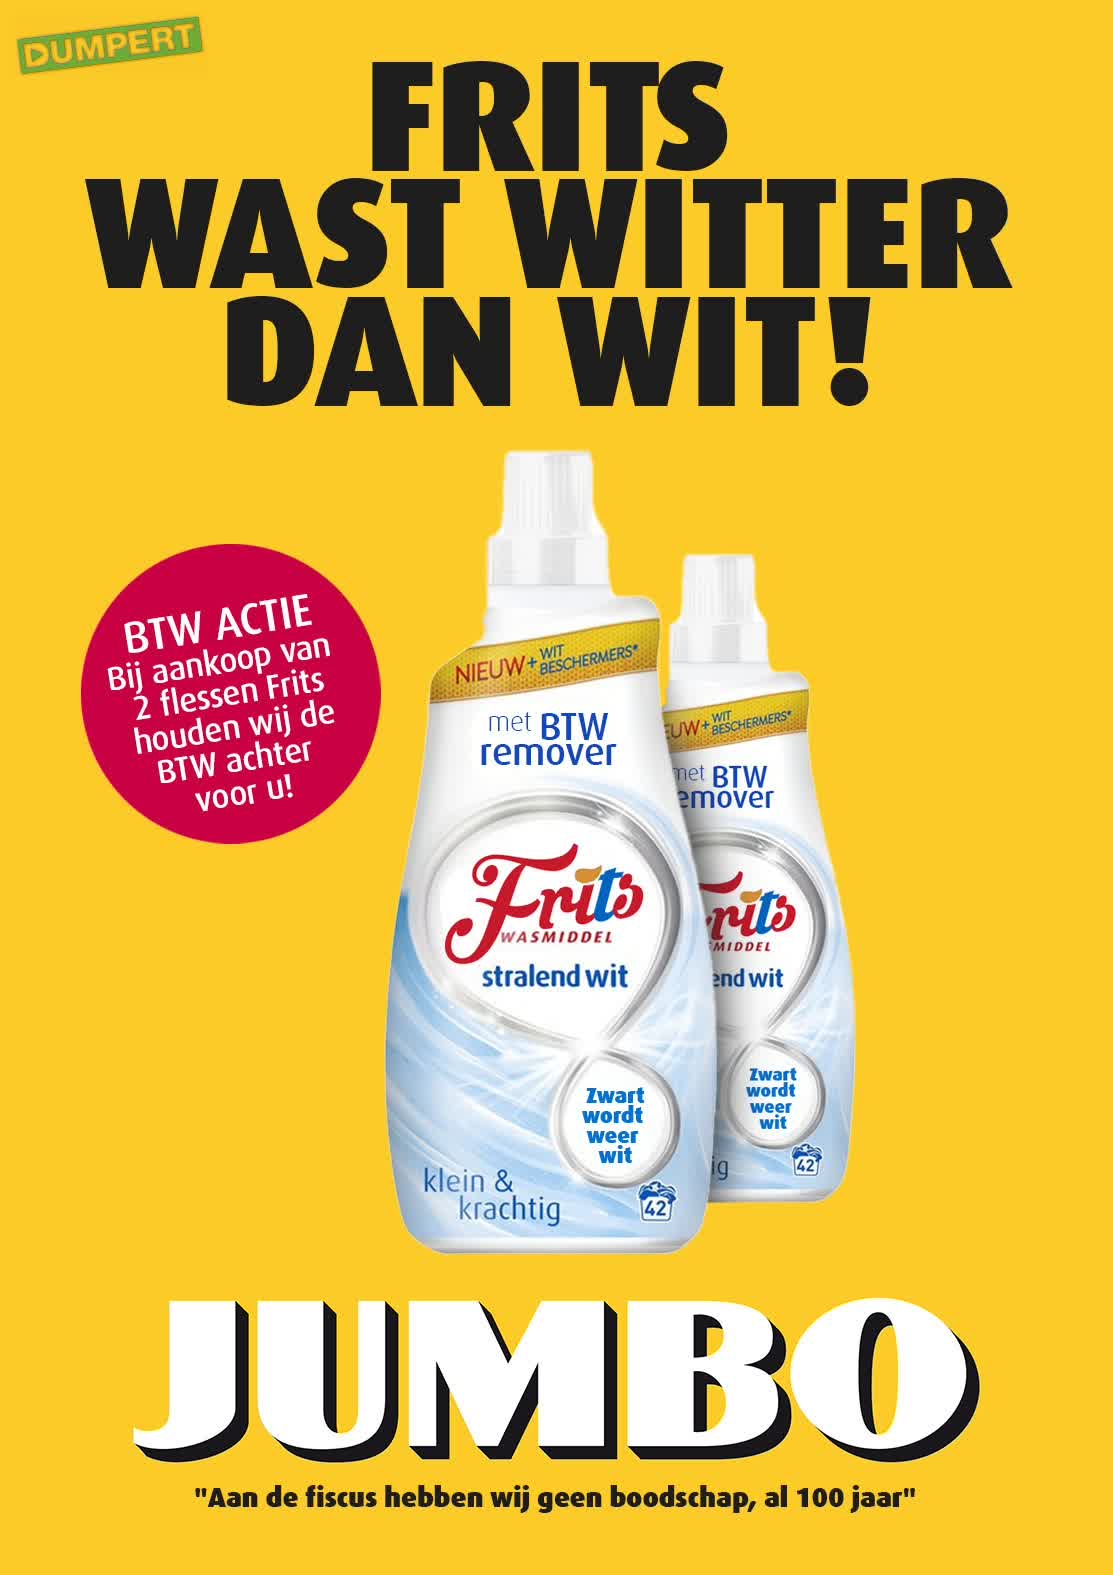 Frits wast witter